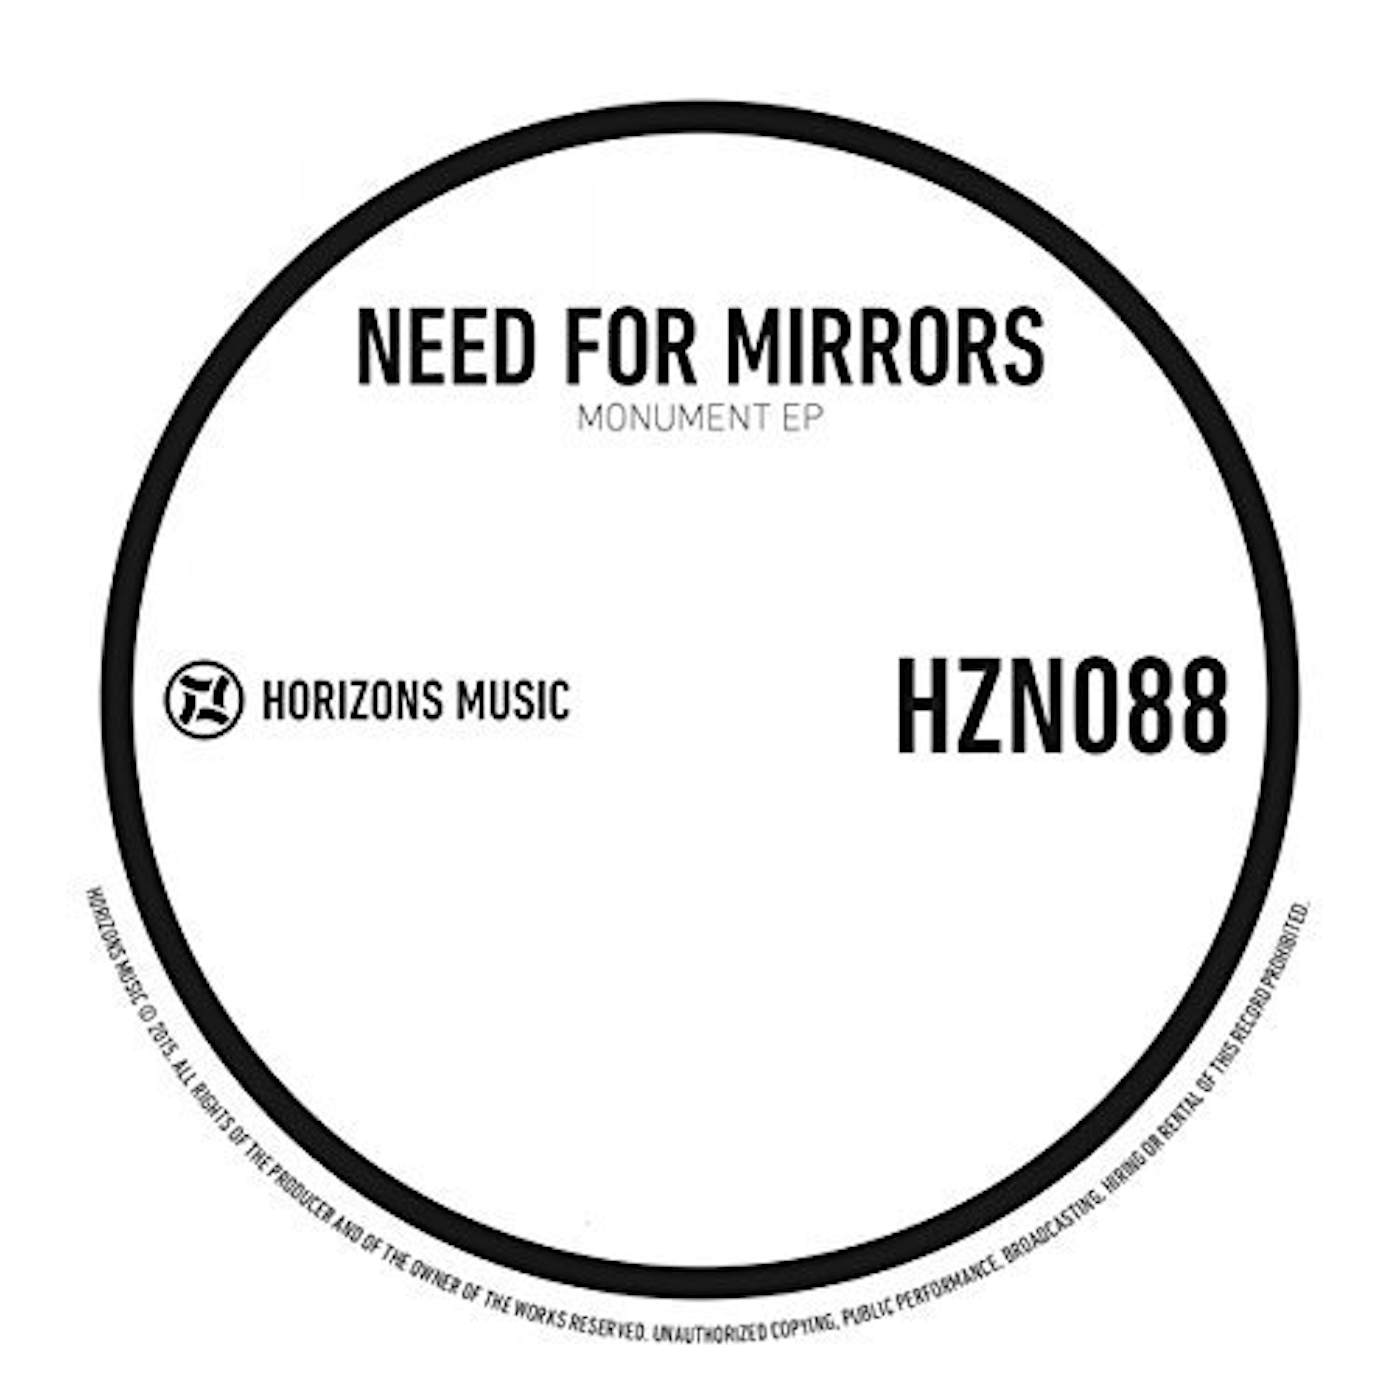 Need For Mirrors Monument EP Vinyl Record